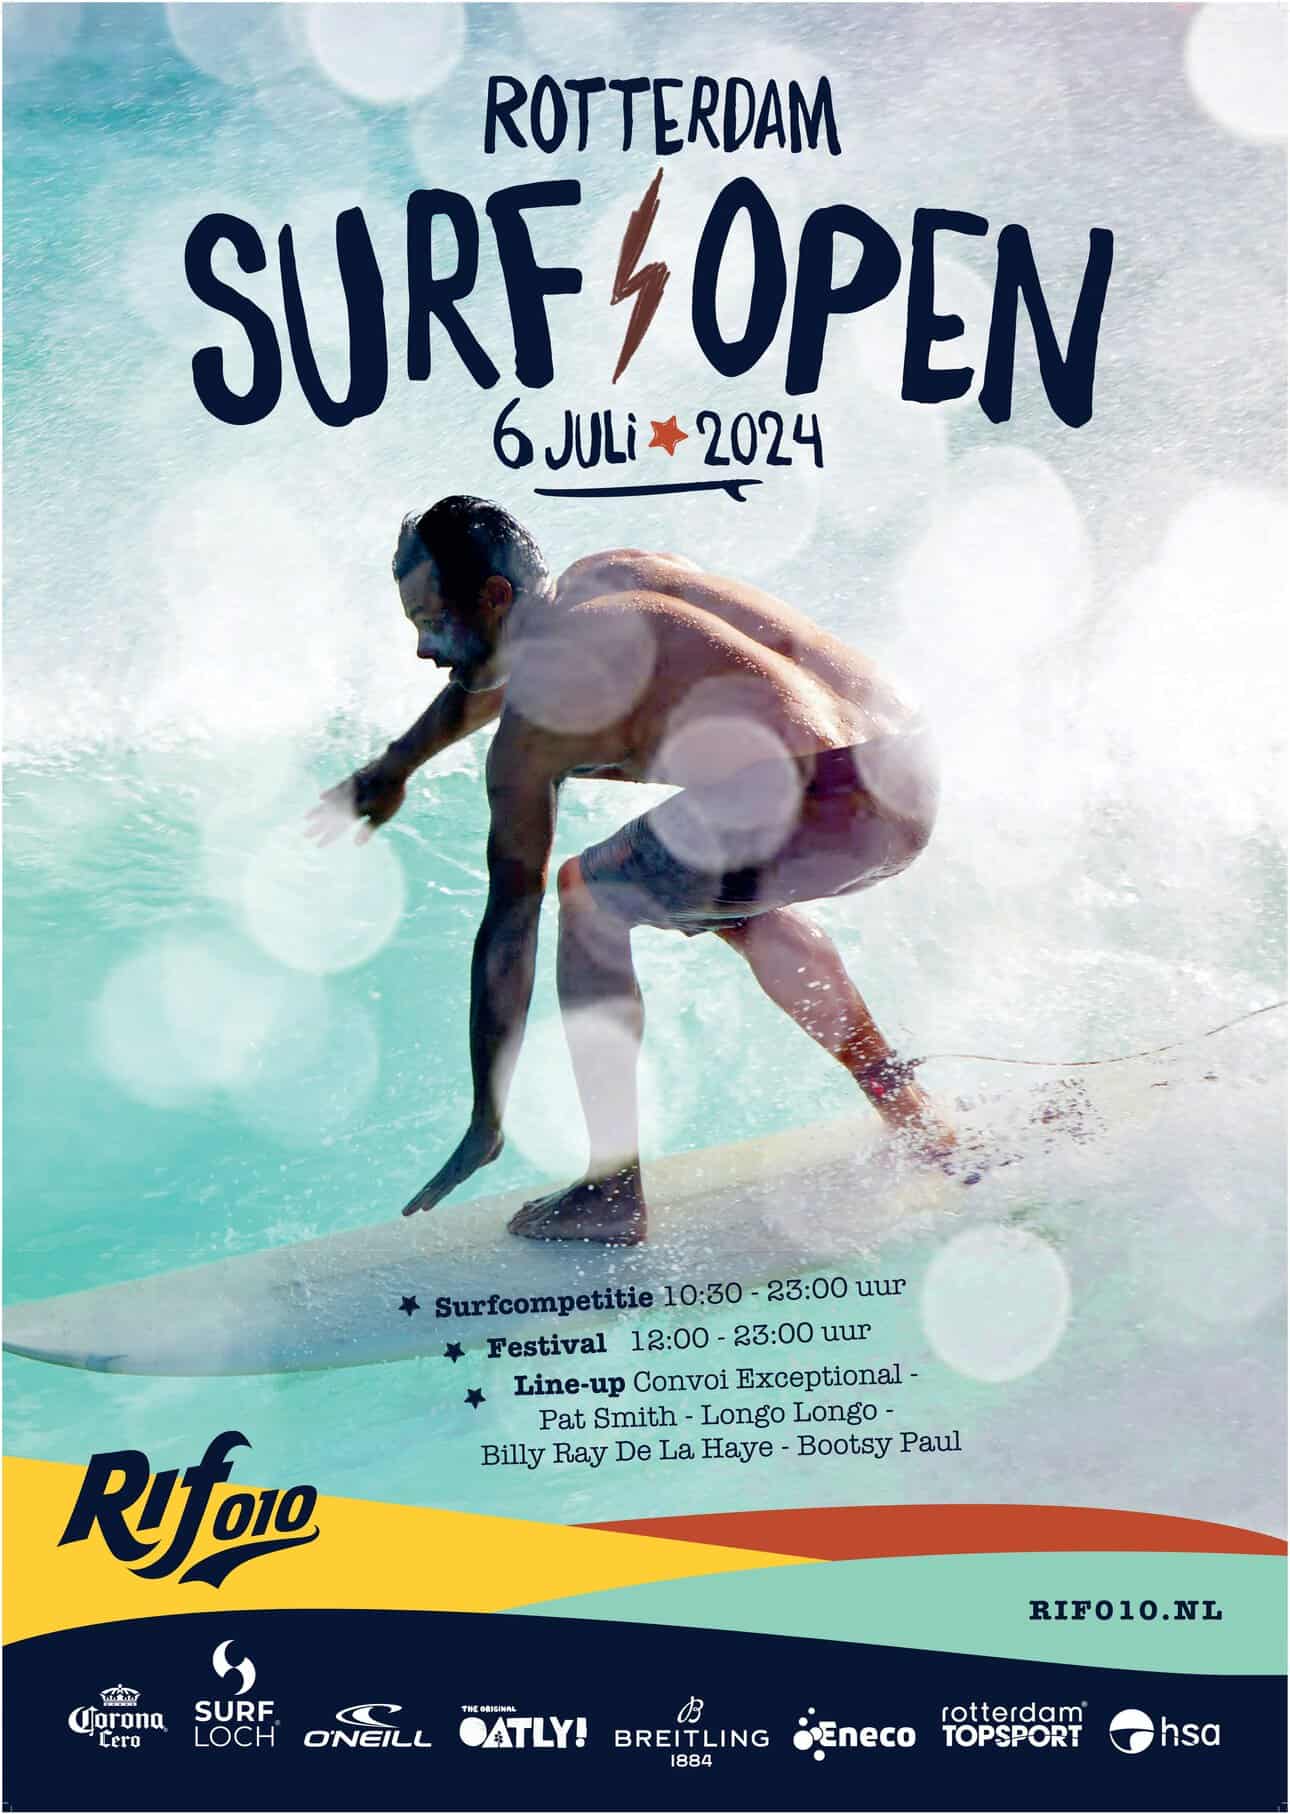 Rotterdam Surf Open at RiF010 - event details